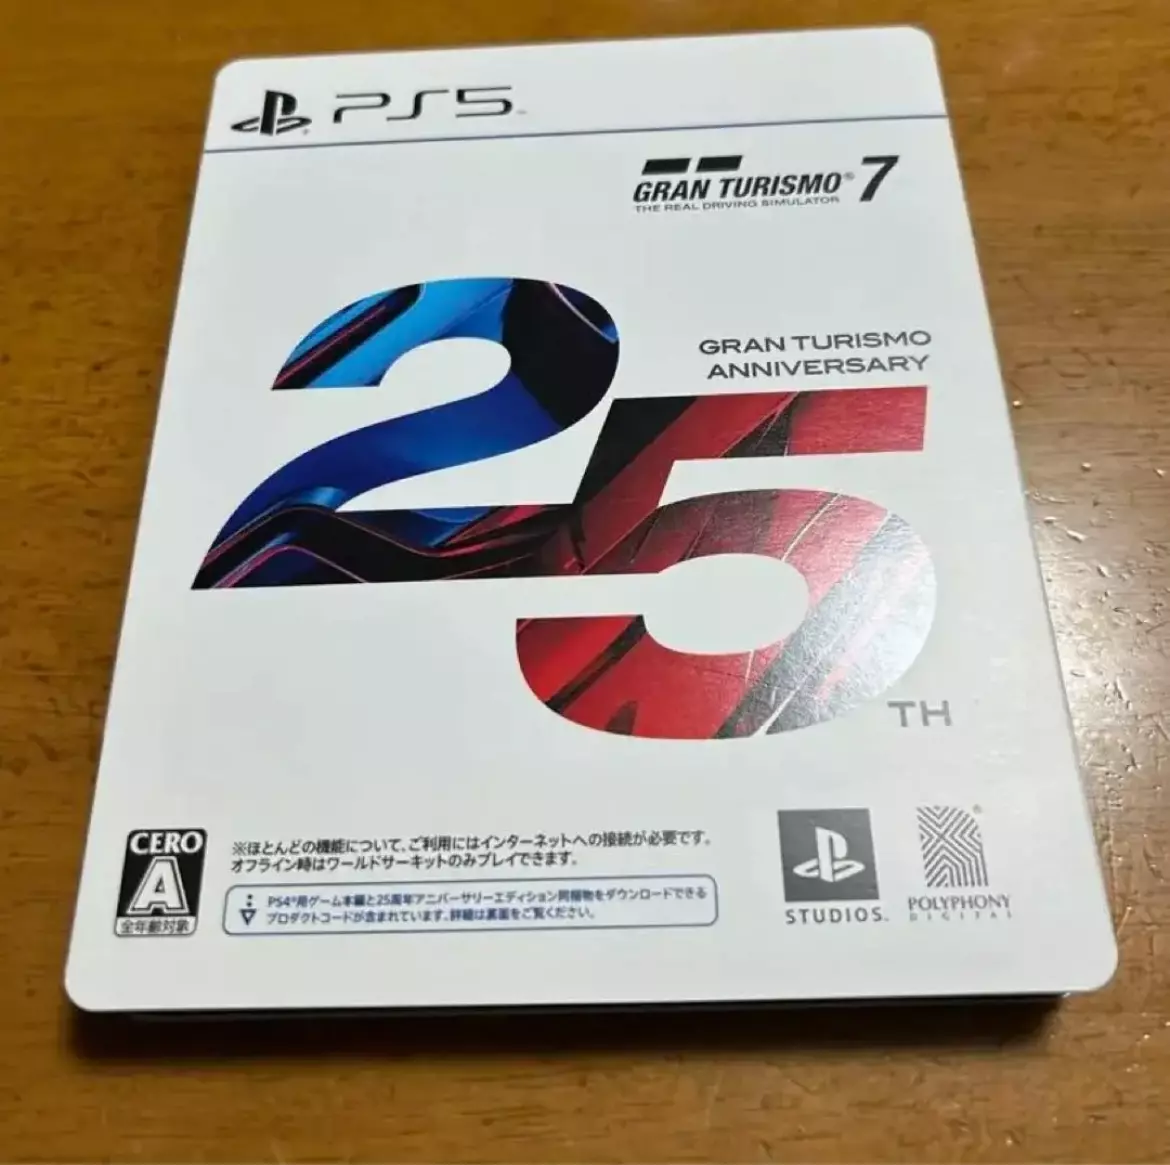 Gran Turismo 7 25Th Anniversary Edition Sony 900 Ps5 Software Japanese